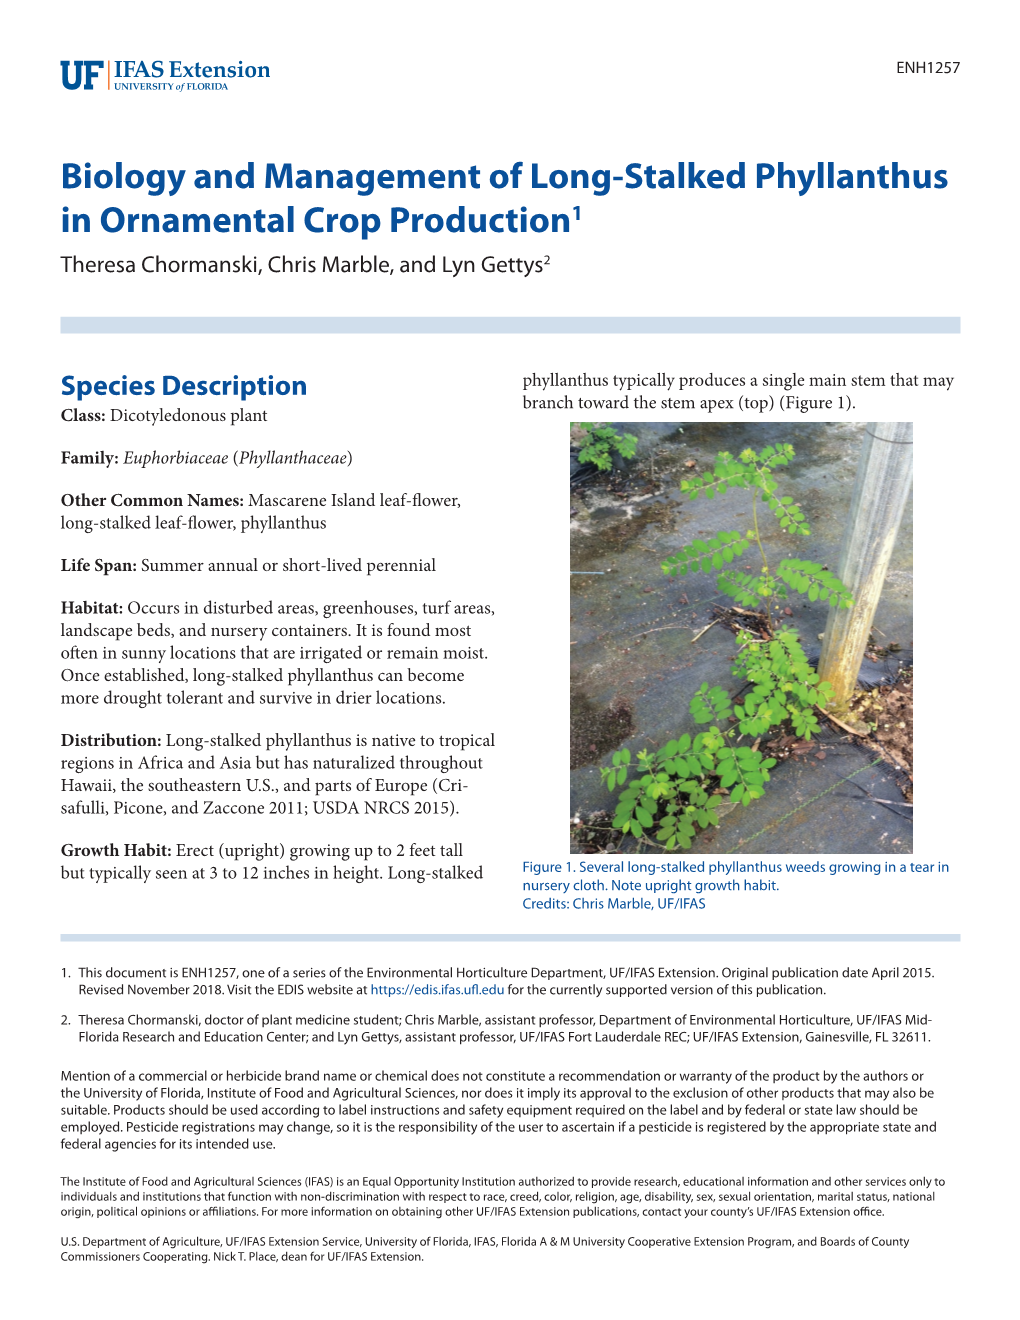 Biology and Management of Long-Stalked Phyllanthus in Ornamental Crop Production1 Theresa Chormanski, Chris Marble, and Lyn Gettys2